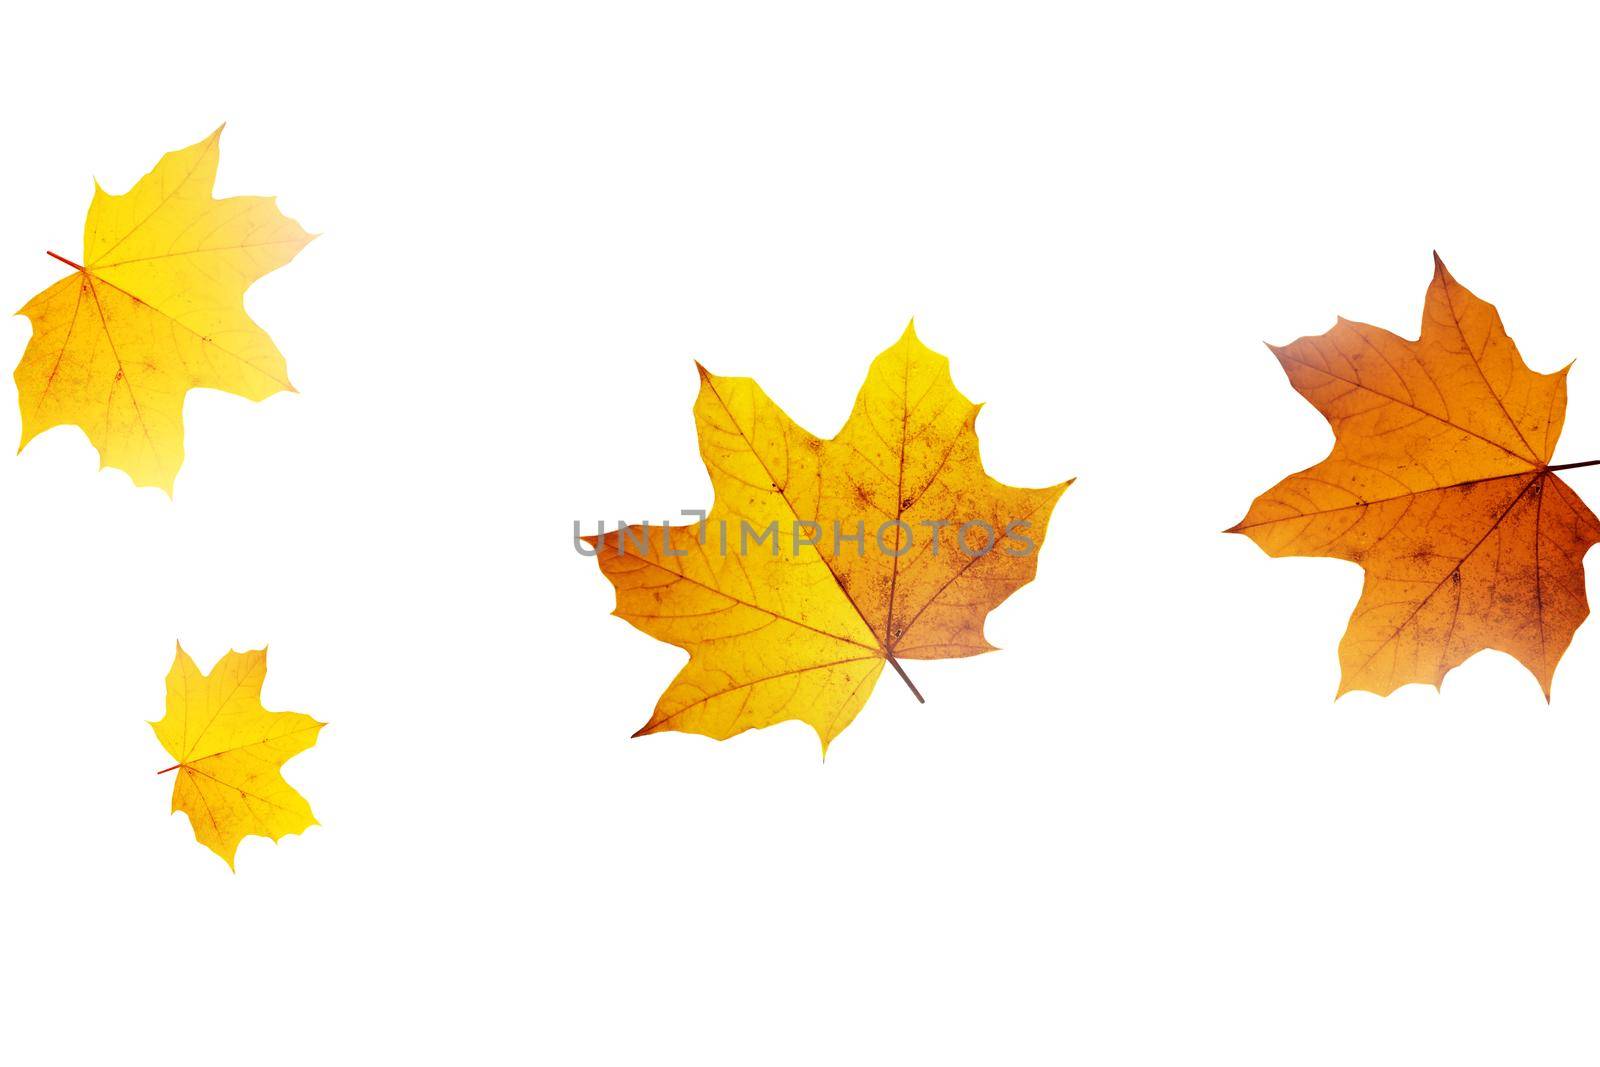 Beautiful autumn background with yellow and red leaves.